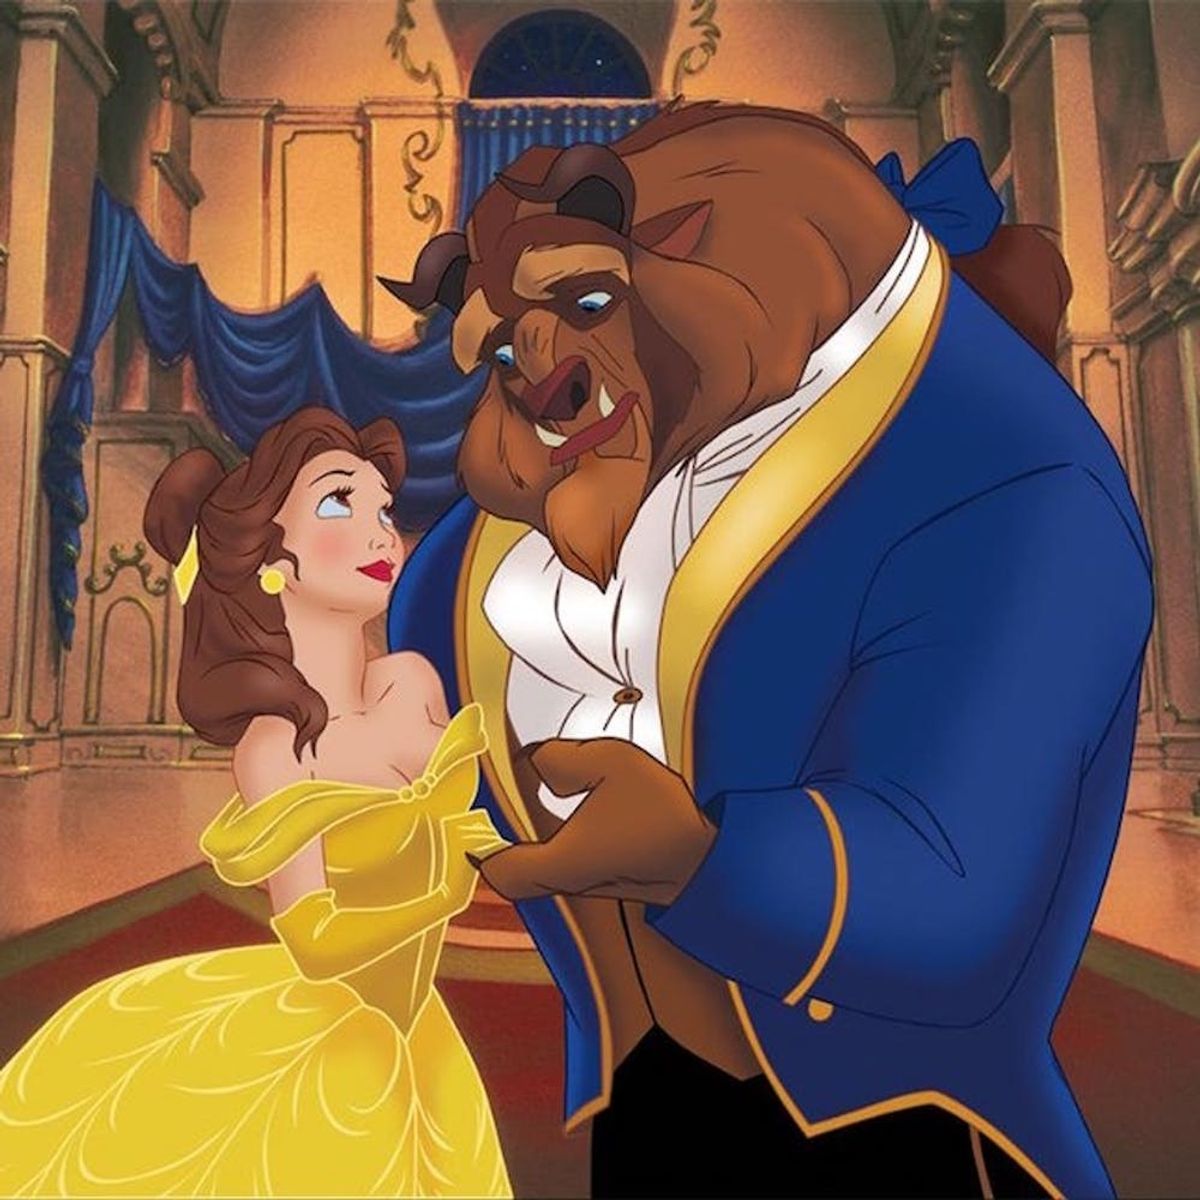 This Dad Trick-or-Treating With His Daughter As Beauty and the Beast Will Make Your Day